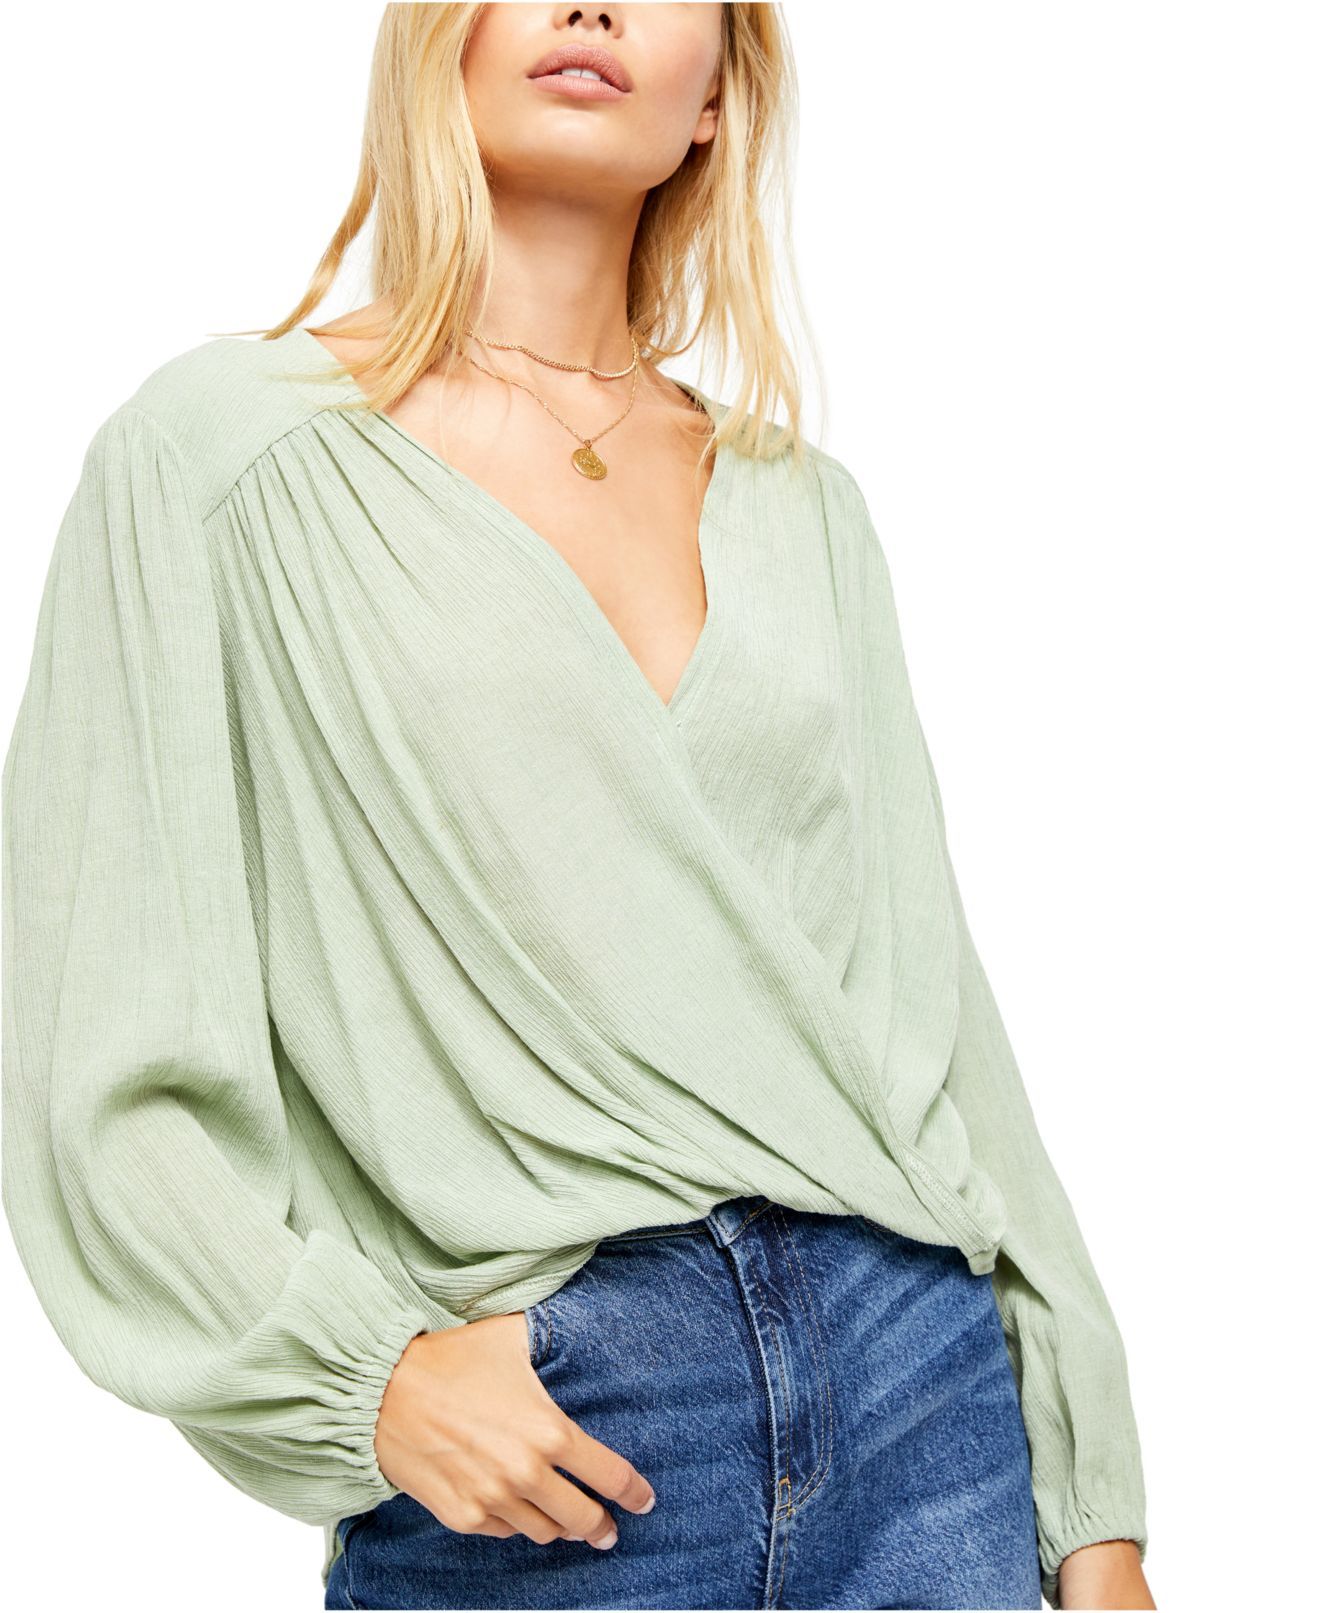 Color: Greens Size Type: Regular Size (Women's): S Sleeve Length: Long Sleeve Type: Blouse Style: Wrap Neckline: V-Neck Pattern: Solid Theme: Modern Material: Rayon